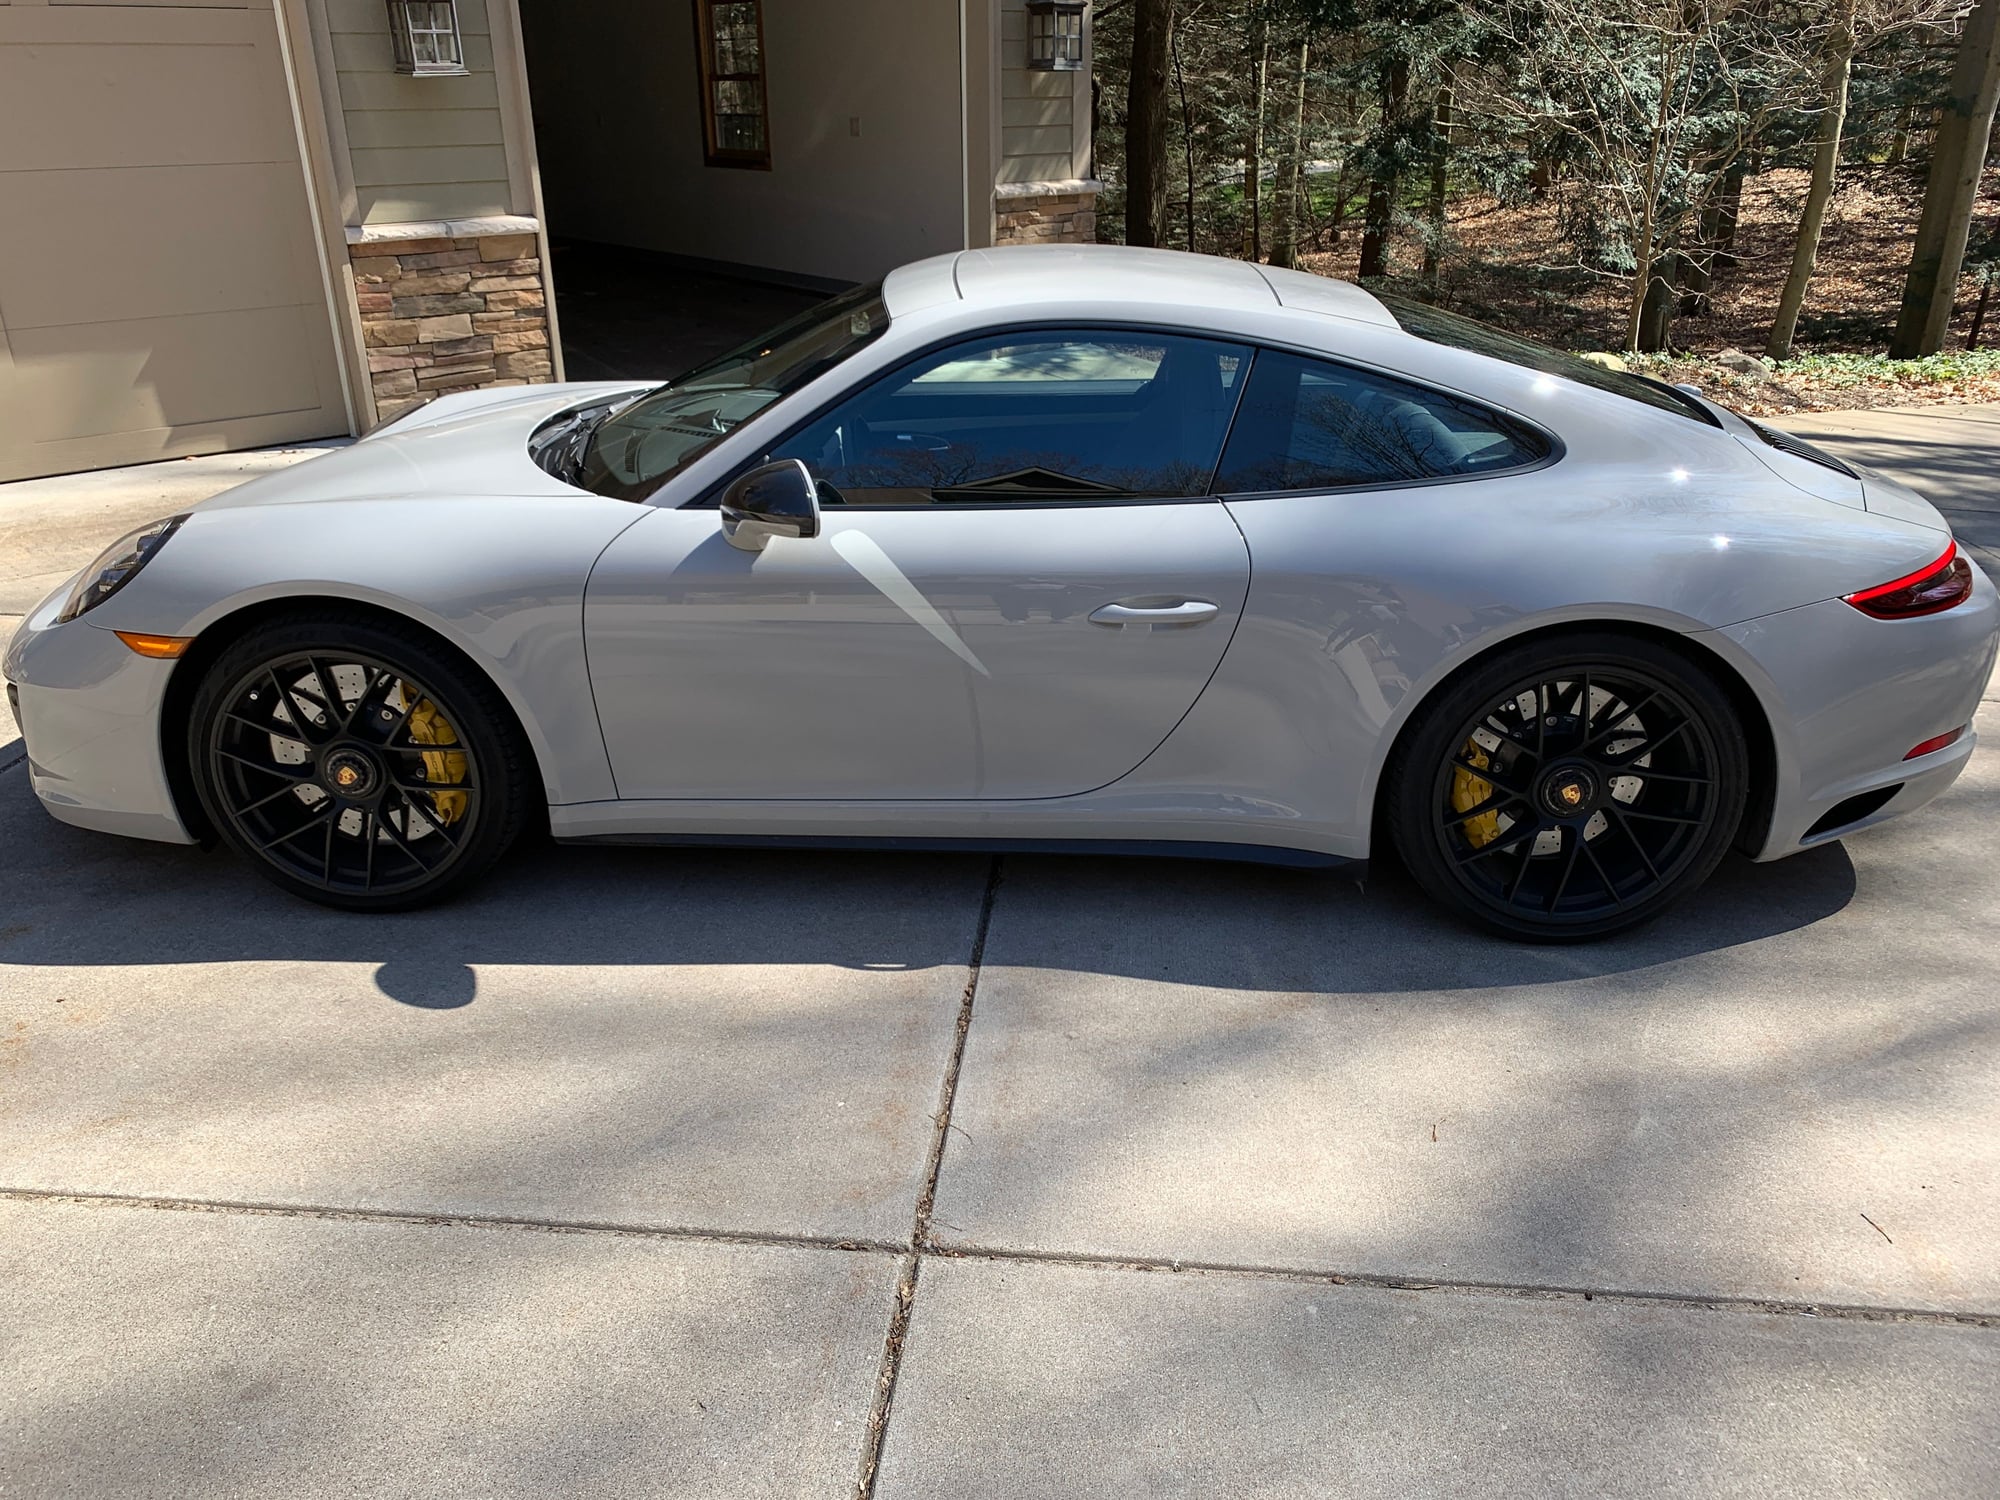 2019 Porsche 911 - 2019 Porsche 911 4GTS for sale - Used - VIN WP0AB2A92KS115004 - 7,500 Miles - 6 cyl - 4WD - Automatic - Coupe - Gray - Spring Lake, MI 49456, United States